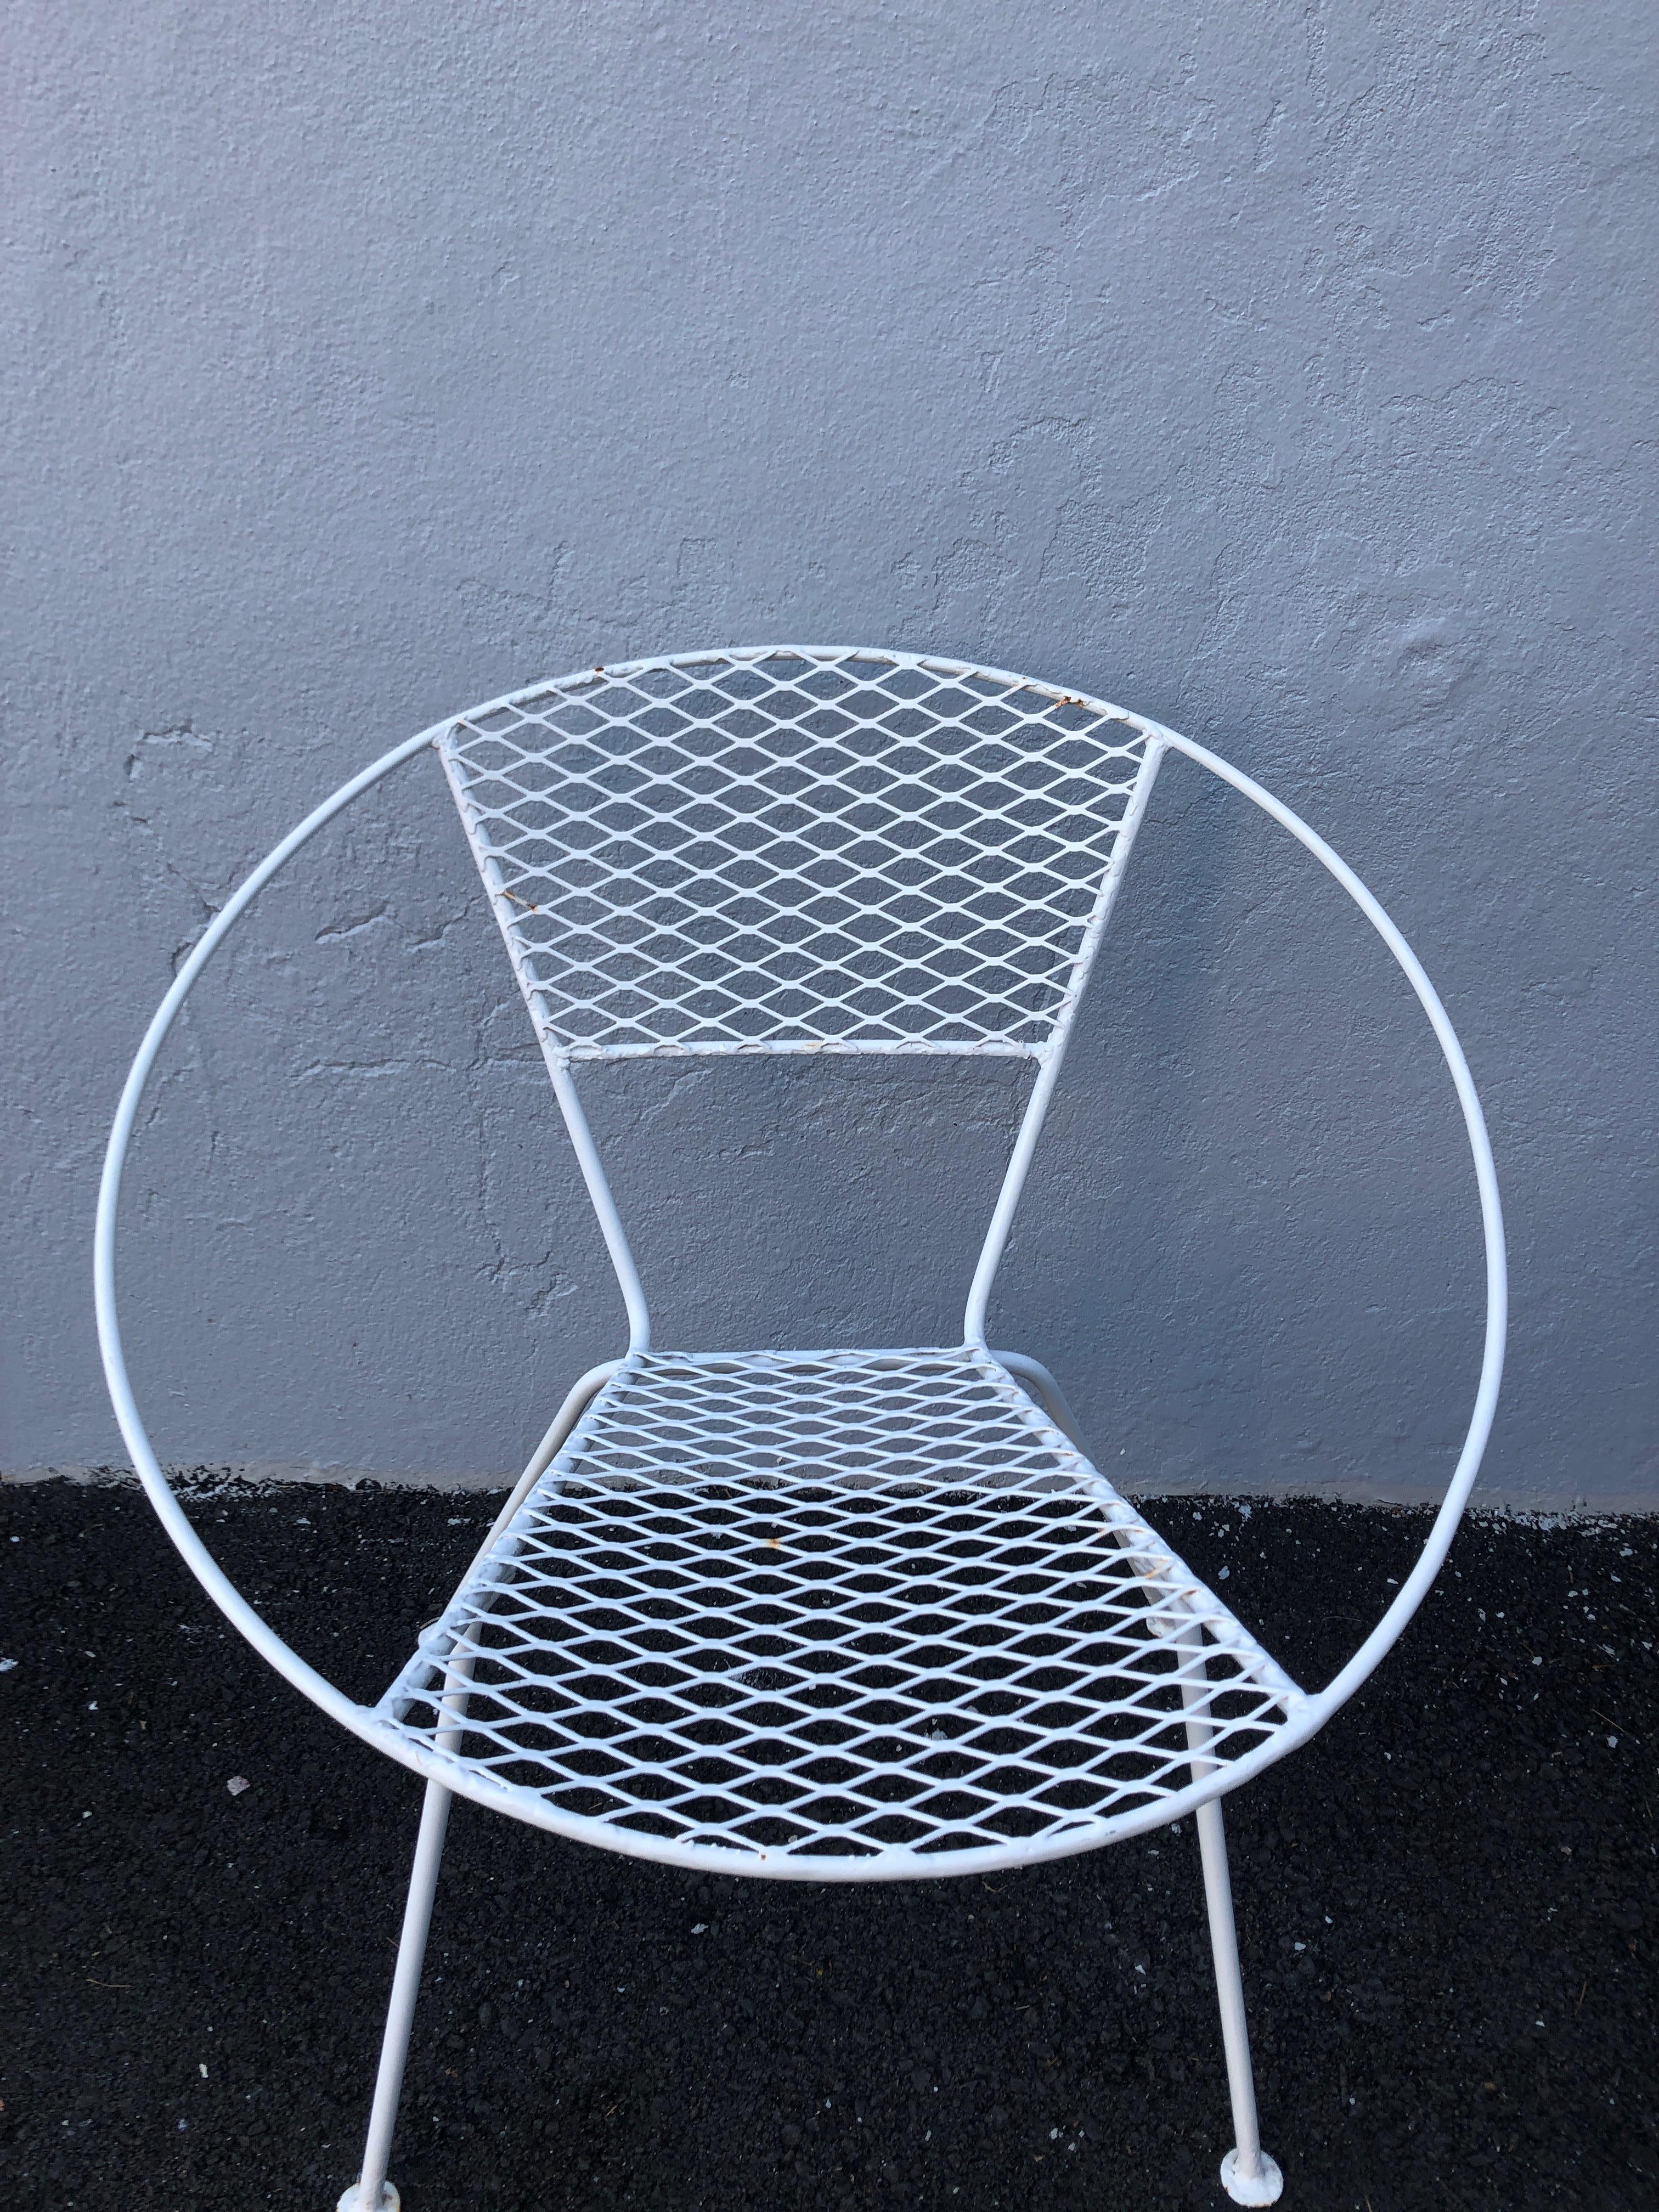 Mid-20th Century Chic Pair of Mid-Century Modern Circular Shaped Patio Chairs